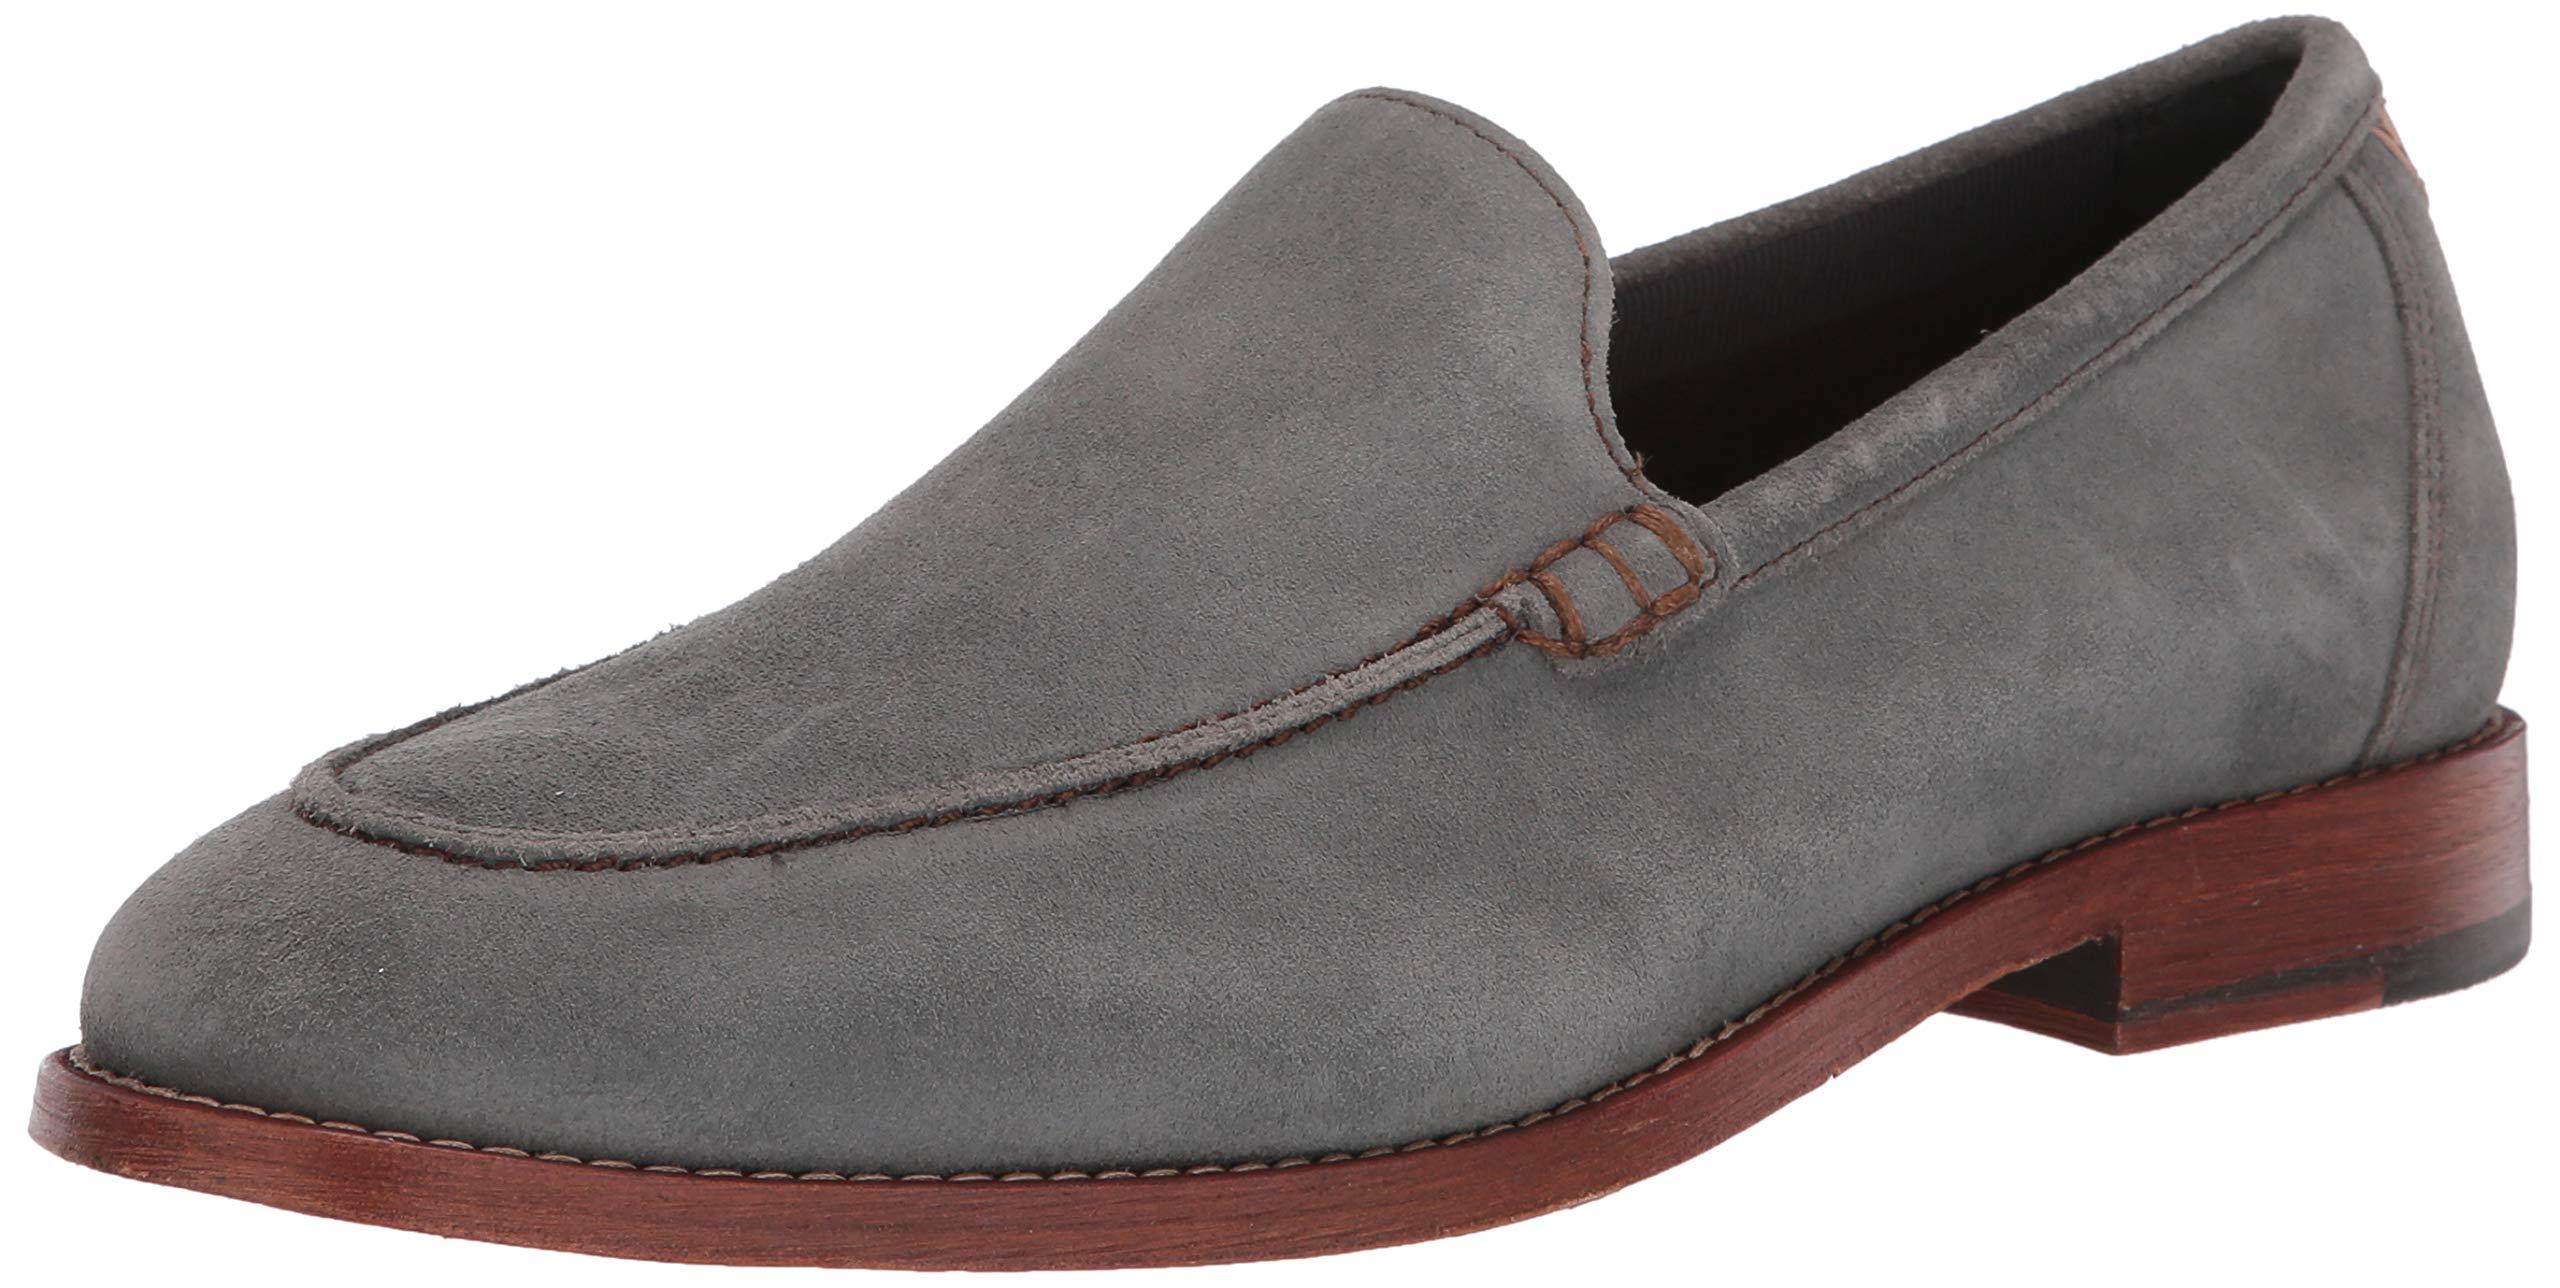 Cole Haan Canvas Feathercraft Grand Venetian Loafer in Gray for Men - Lyst